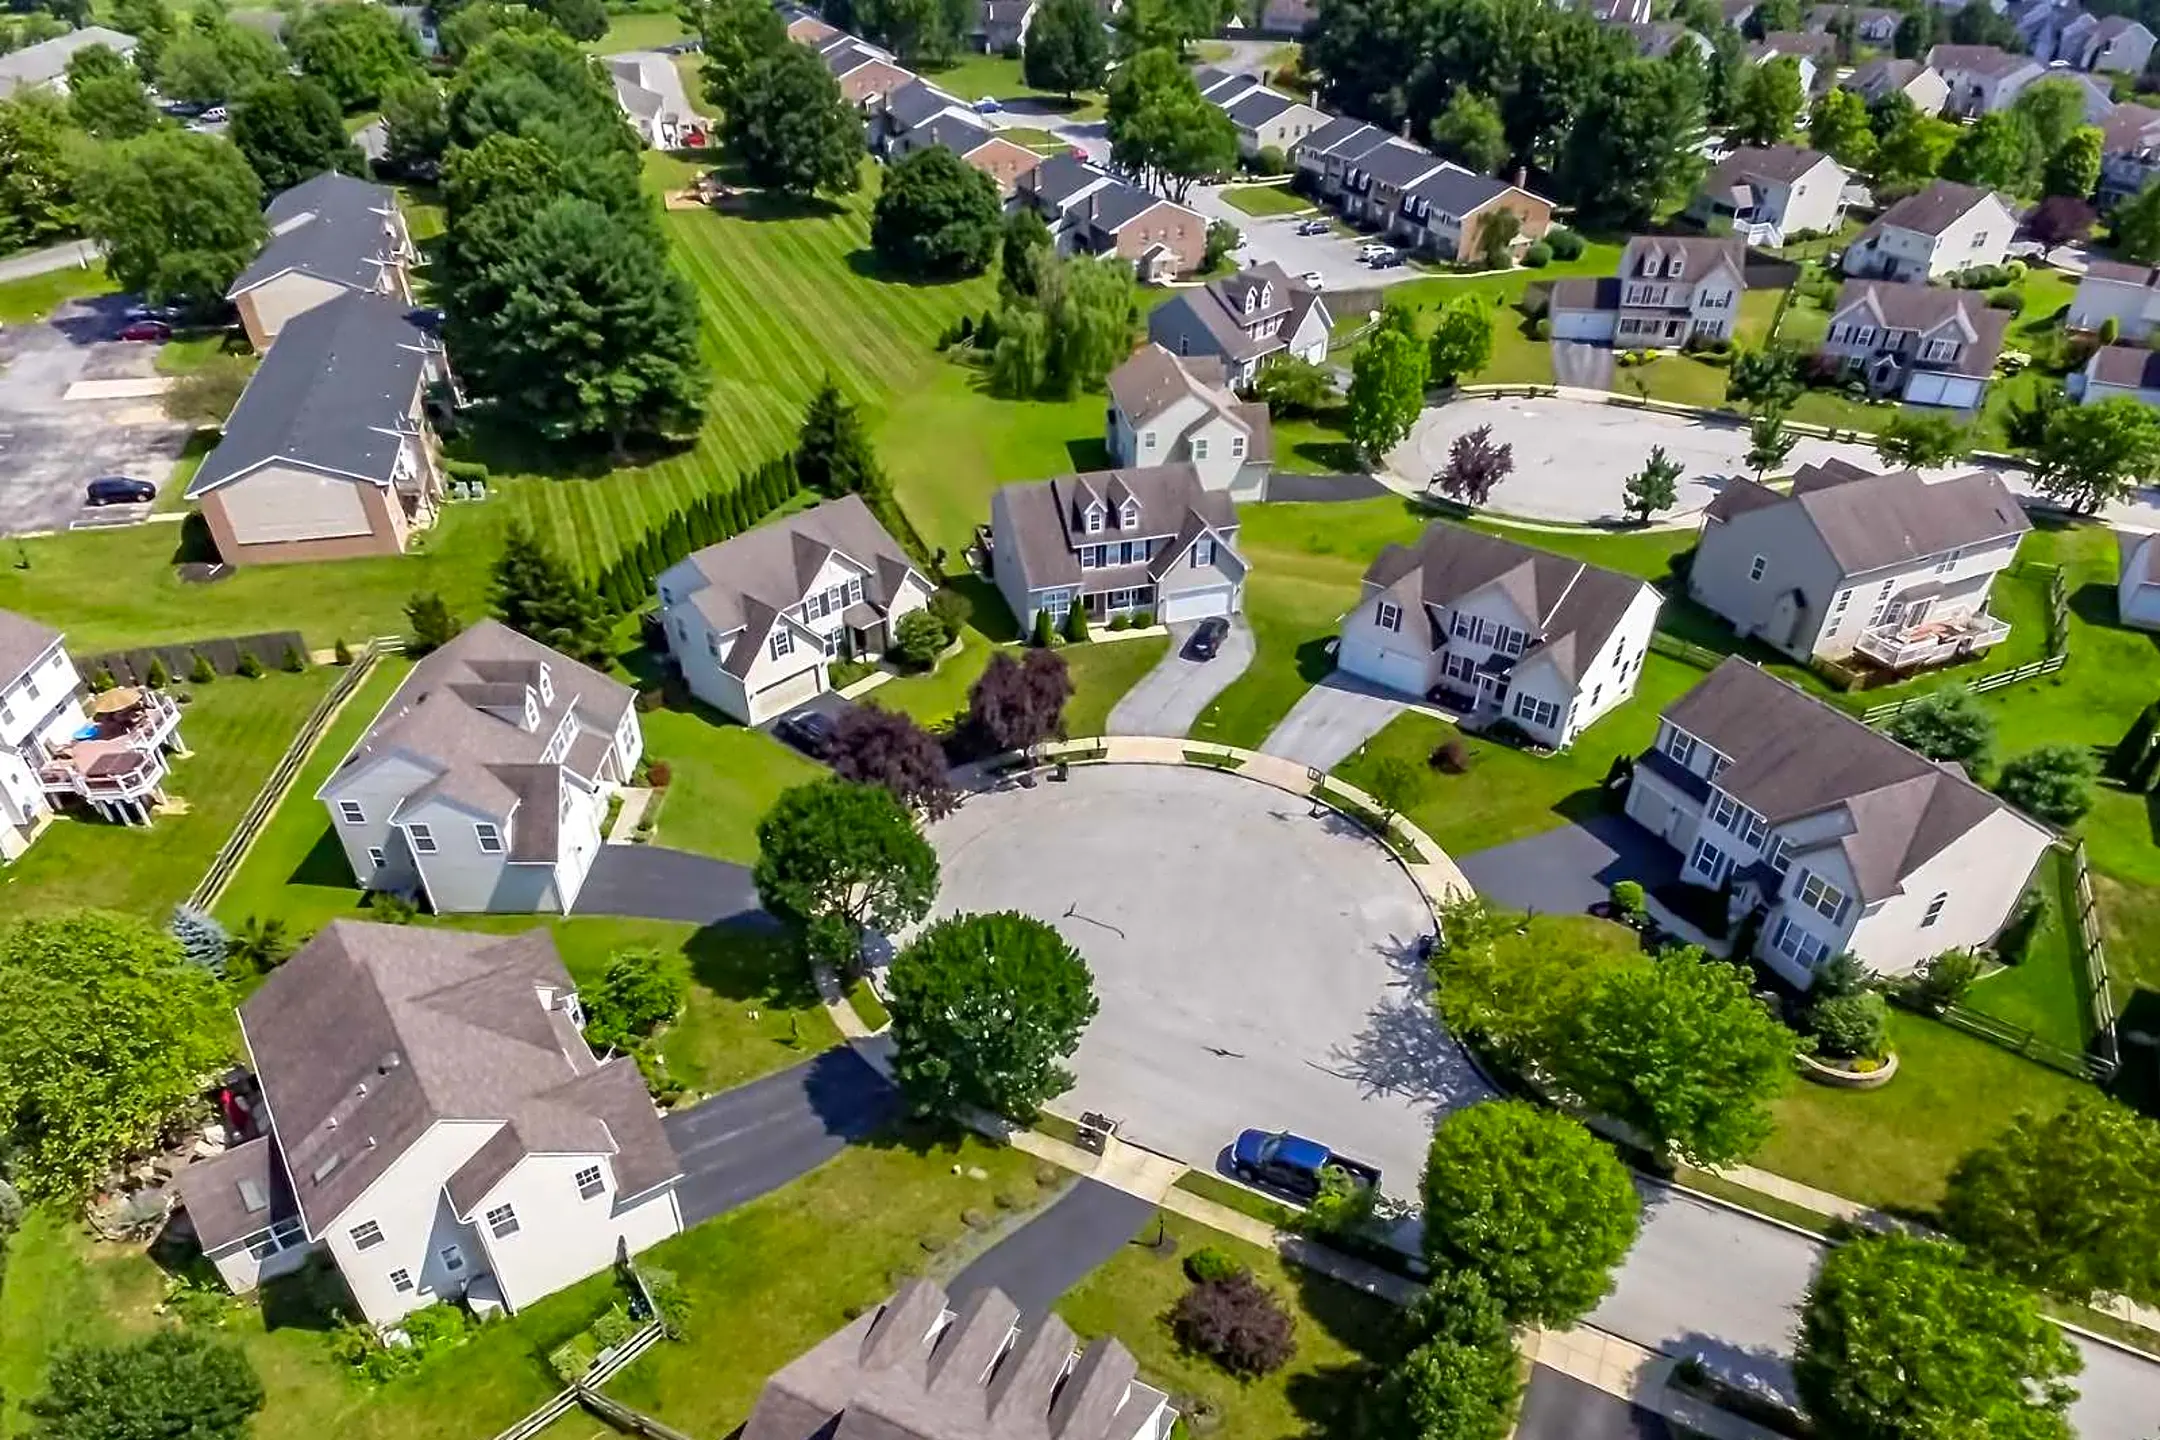 Landscaping - The Fairways Apartments & Townhomes - Thorndale, PA